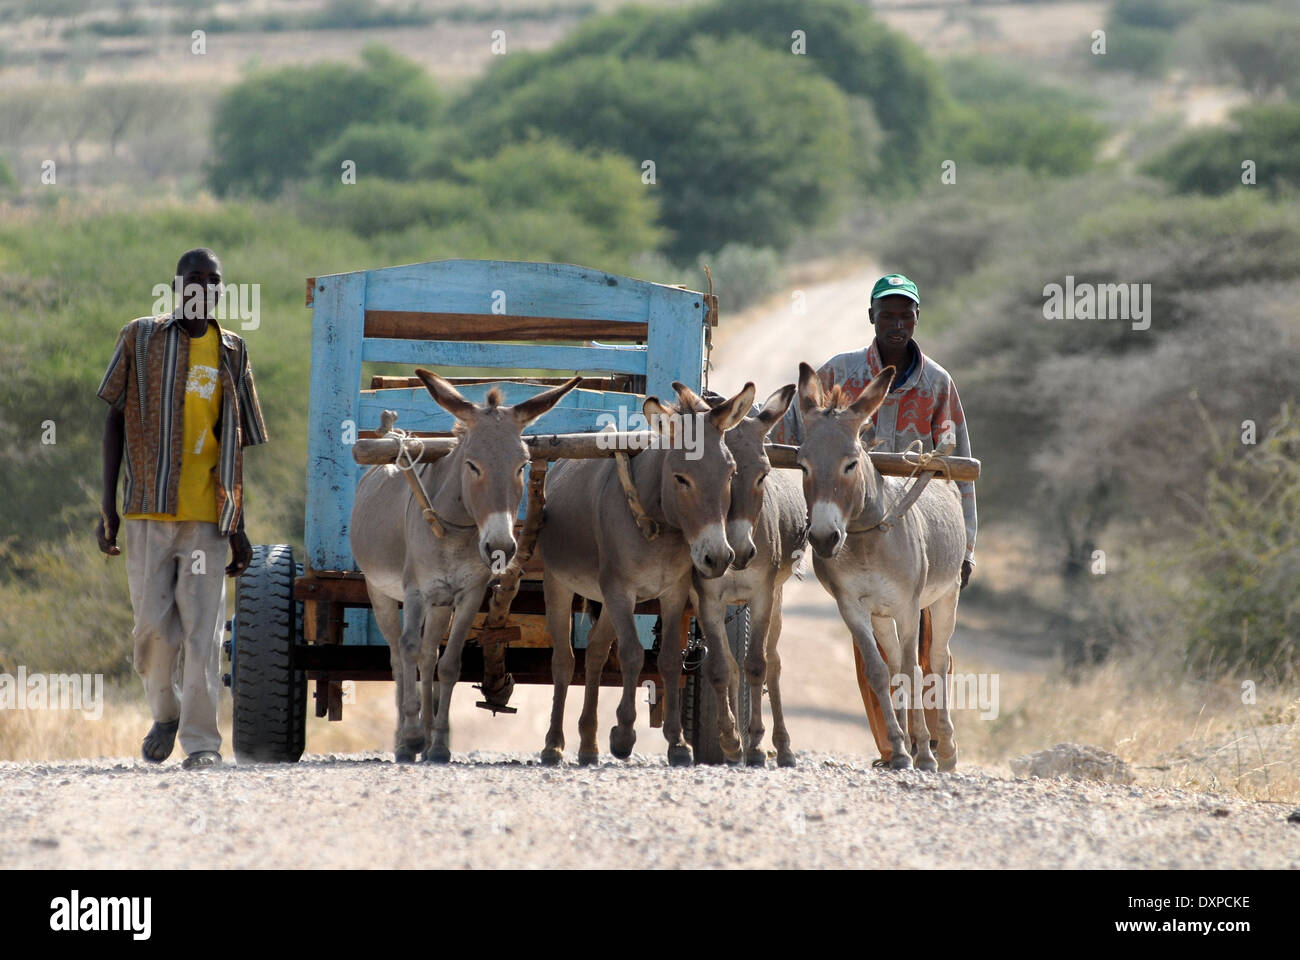 TANZANIA Shinyanga, Meatu, farmer transport agricultural products with donkey cart Stock Photo